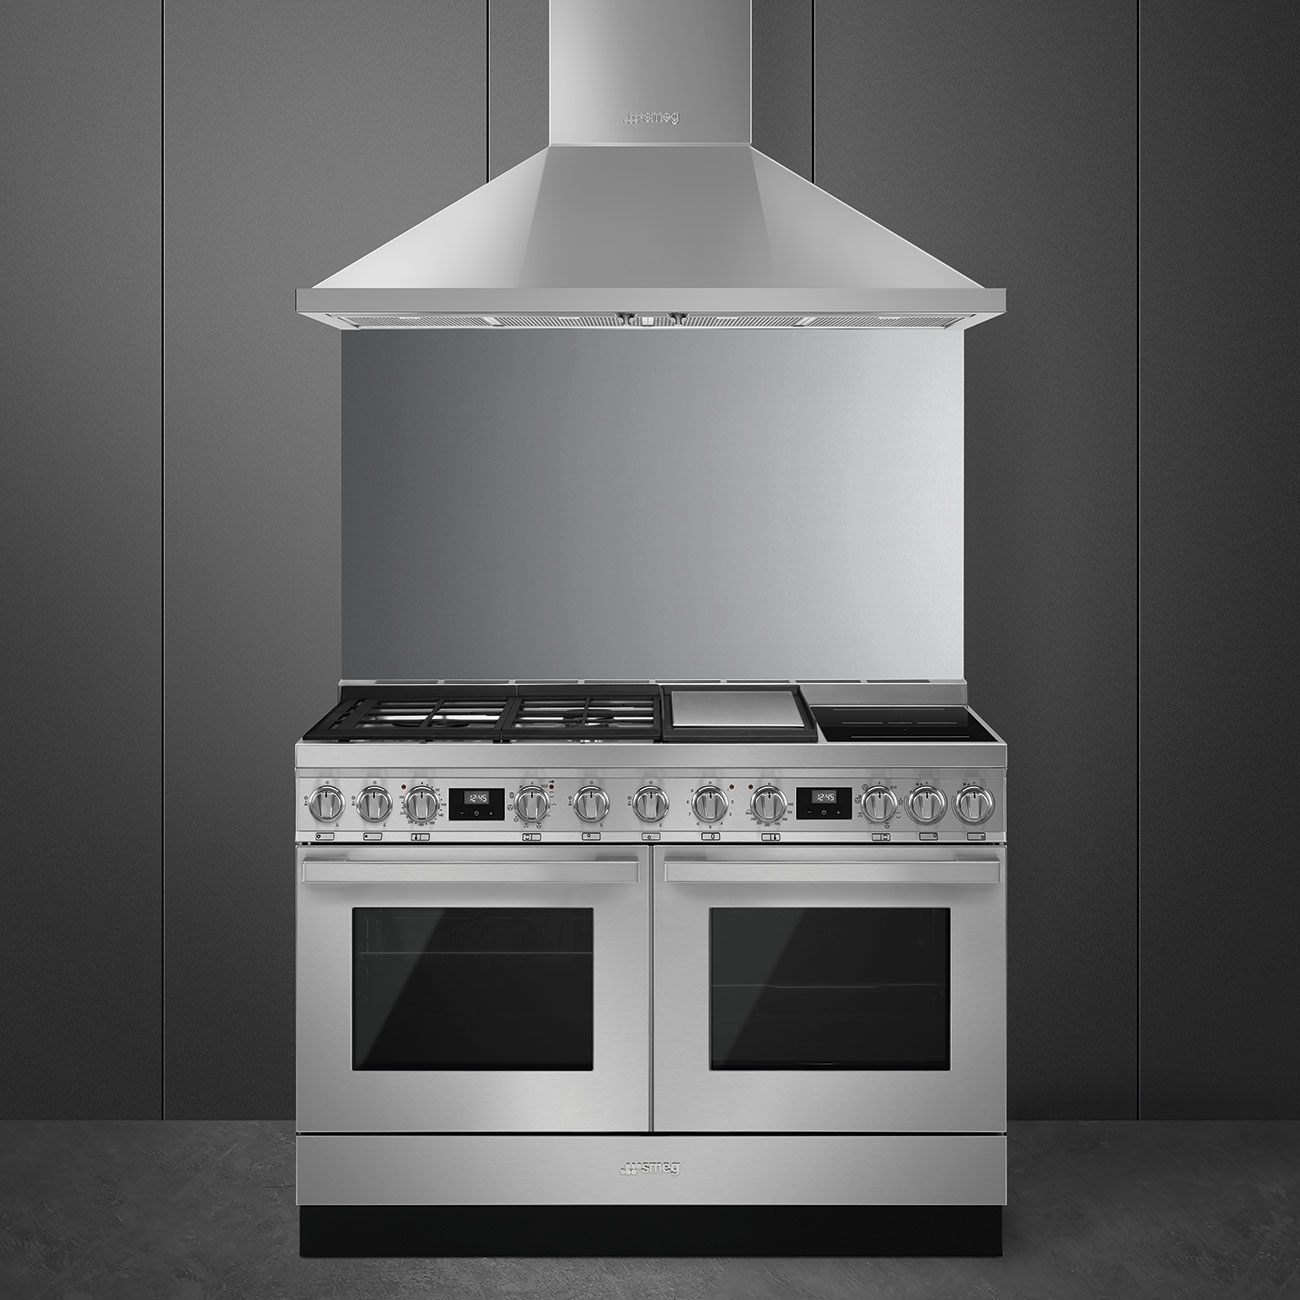 Smeg Stainless steel Cooker with Mixed Hob_2